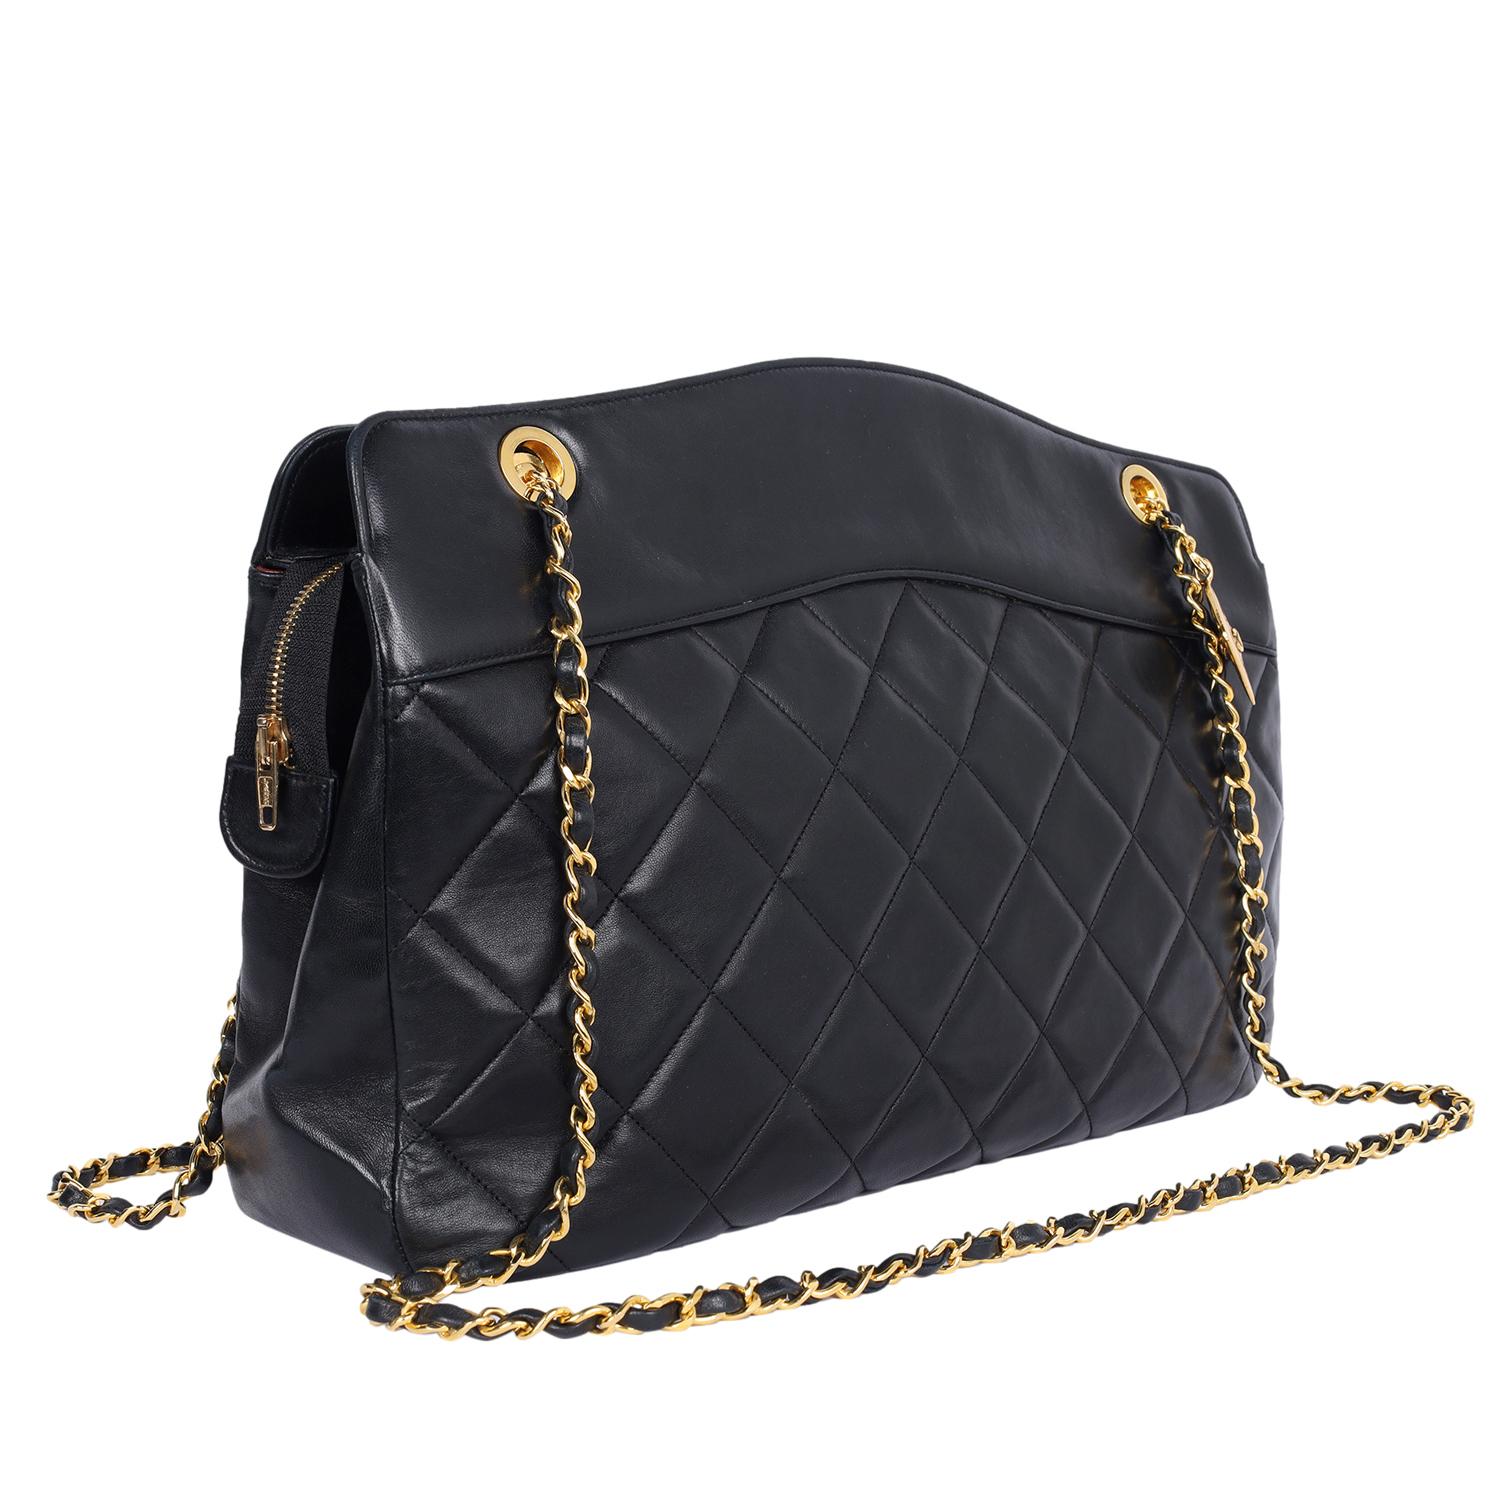 Chanel Black Quilted Lambskin Leather Crossbody Bag 1989 For Sale 2